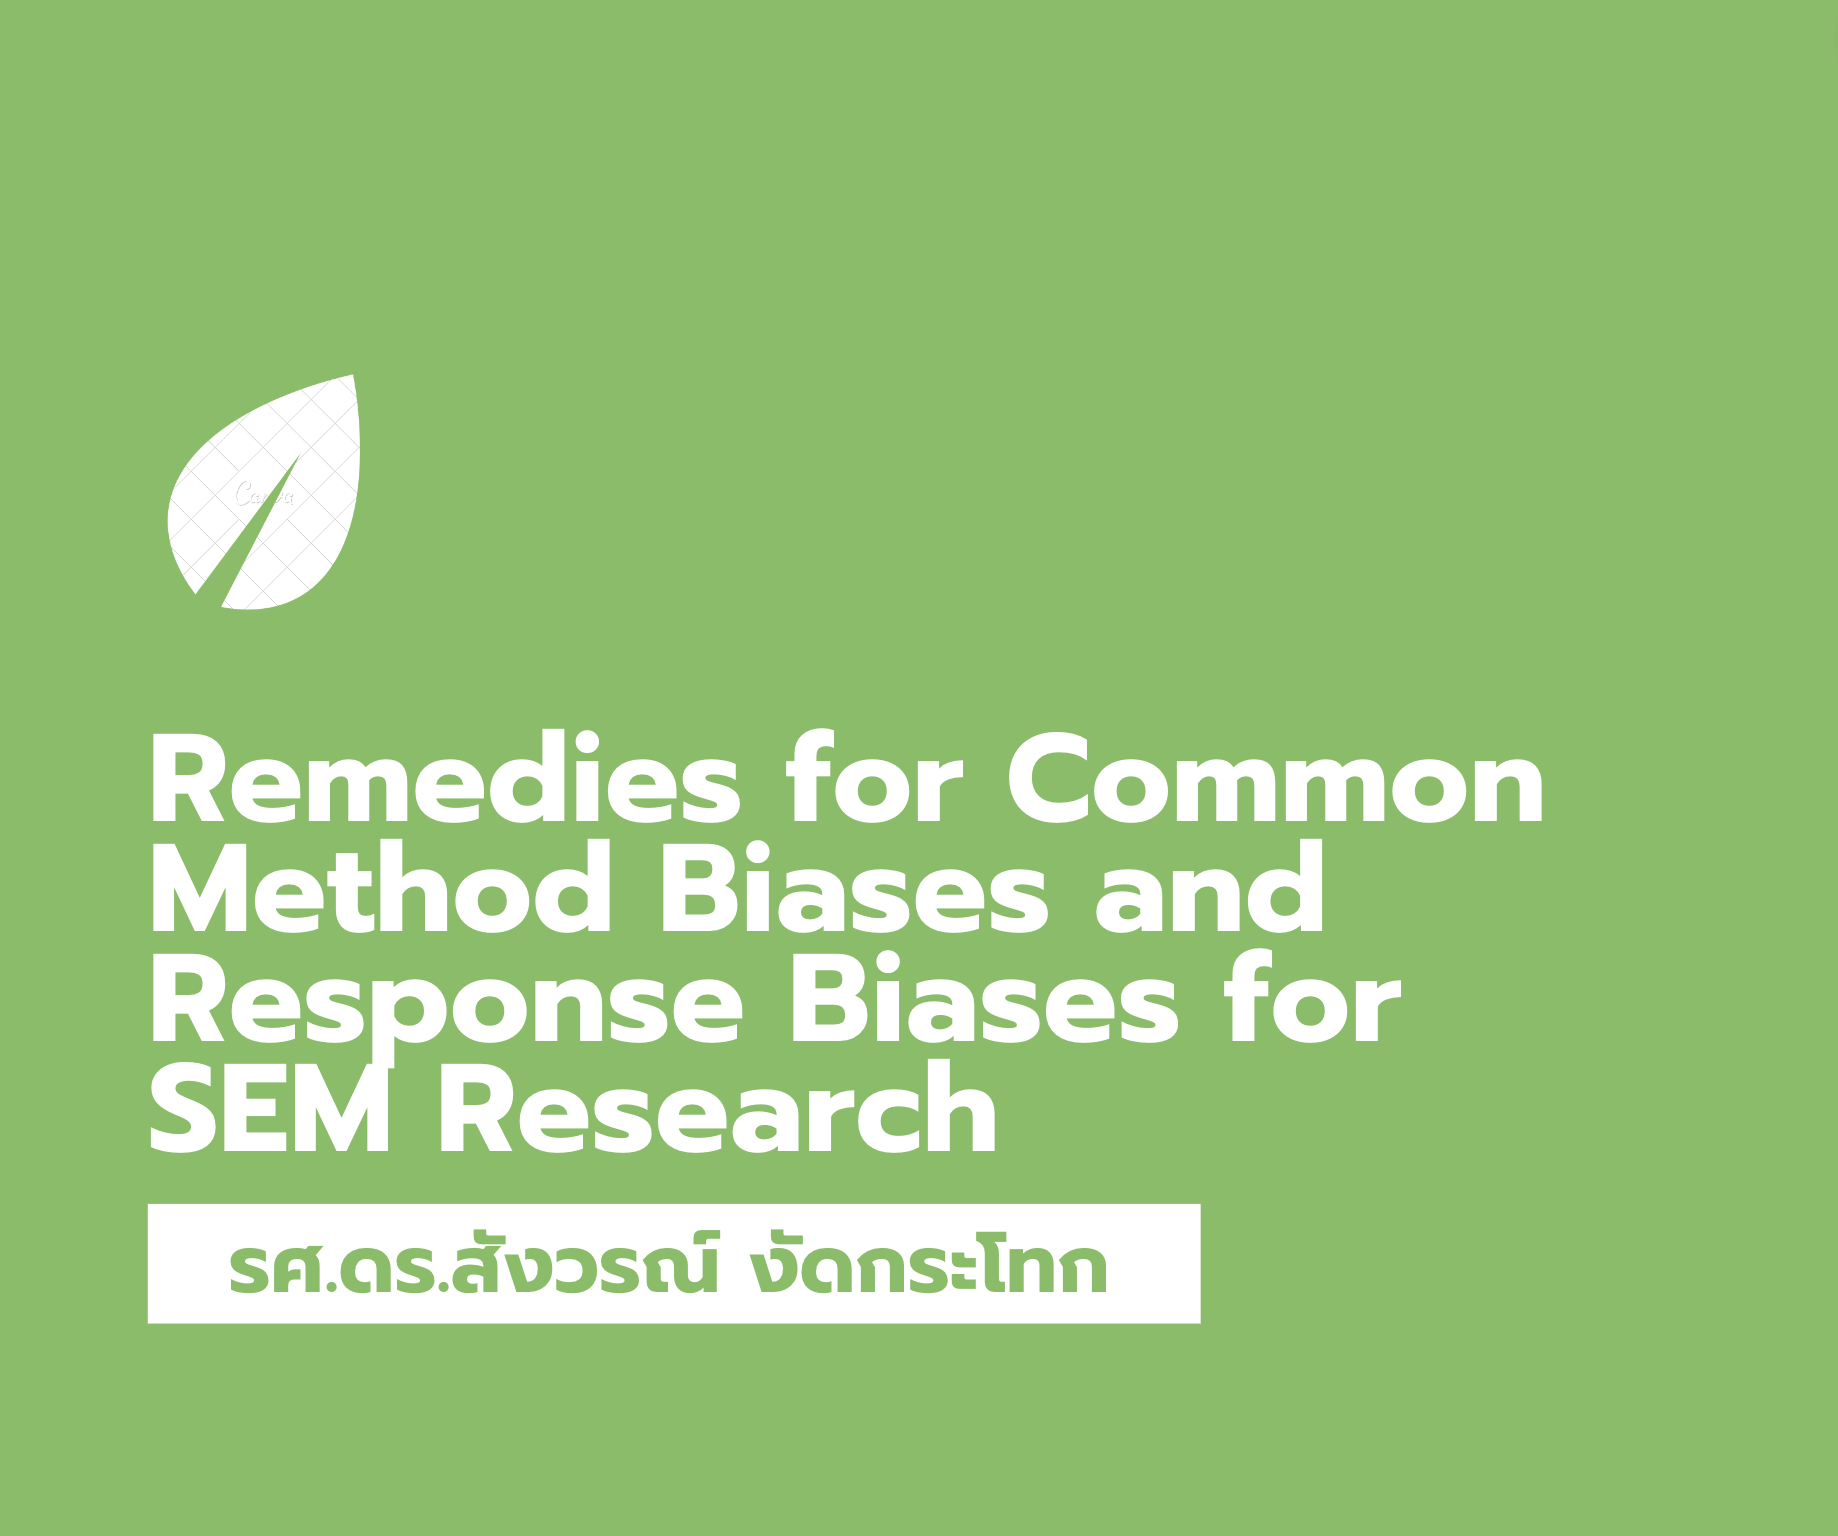 Workshop 3 - Remedies for Common Method Biases and Response Biases for SEM Research